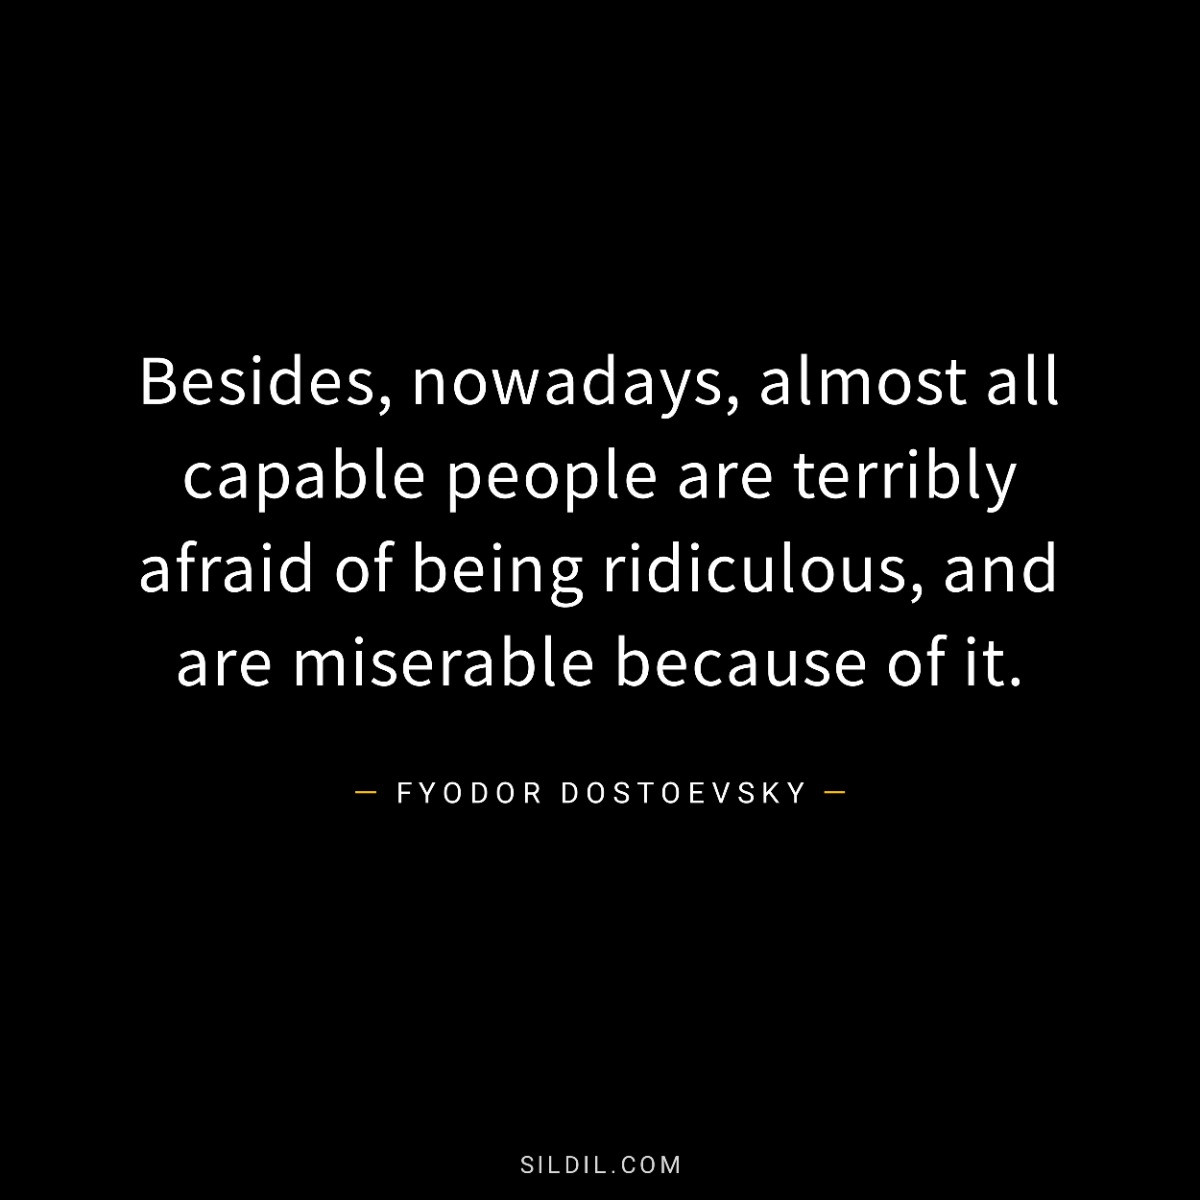 Besides, nowadays, almost all capable people are terribly afraid of being ridiculous, and are miserable because of it.